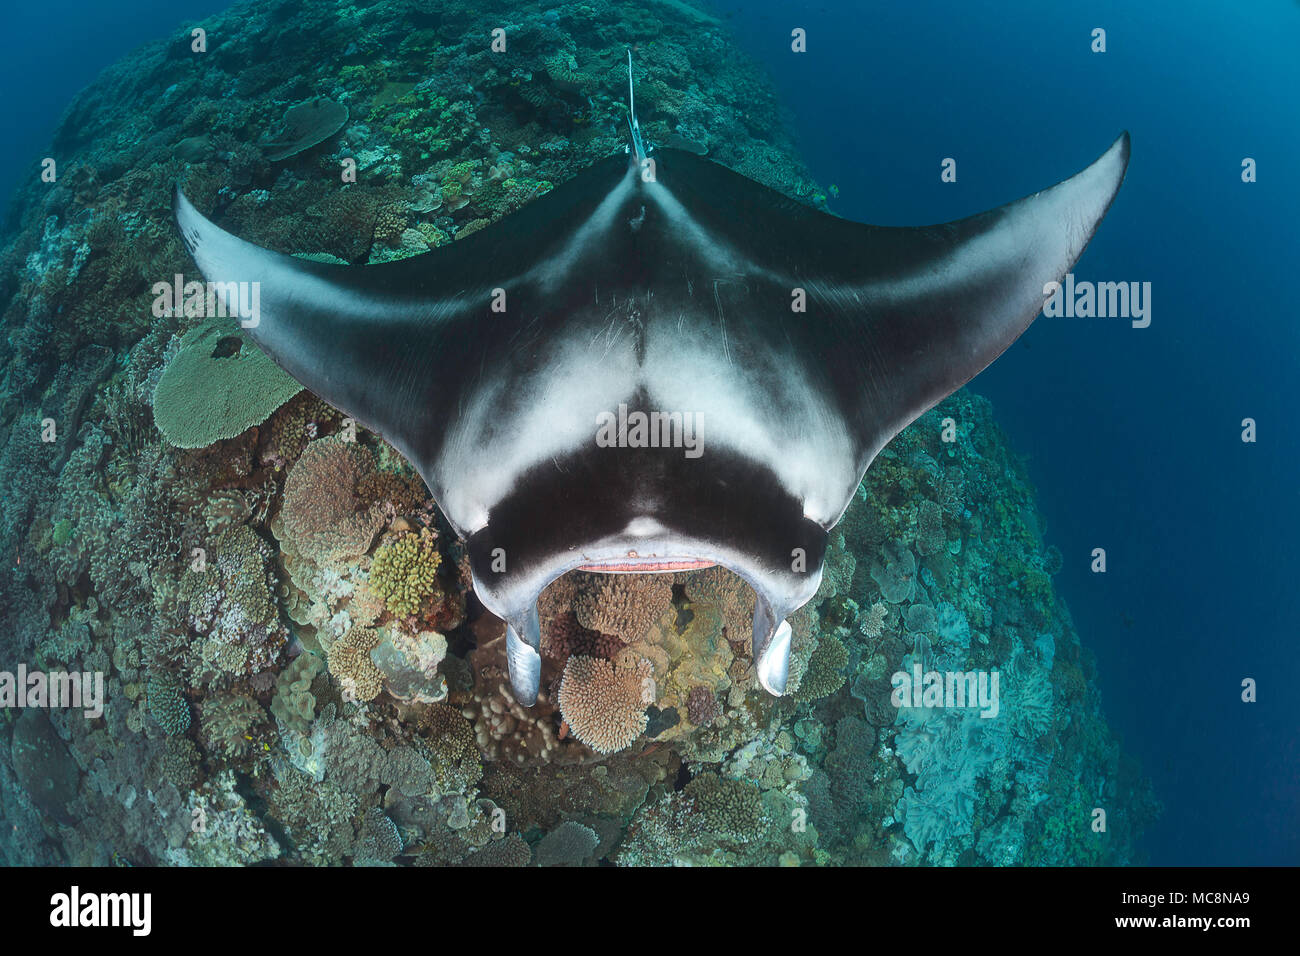 A manta ray, Manta alfredi, gets close to the reef to be inspected by small cleaner wrasse on Manta Reef off the island of Kandavu, Fiji. Stock Photo